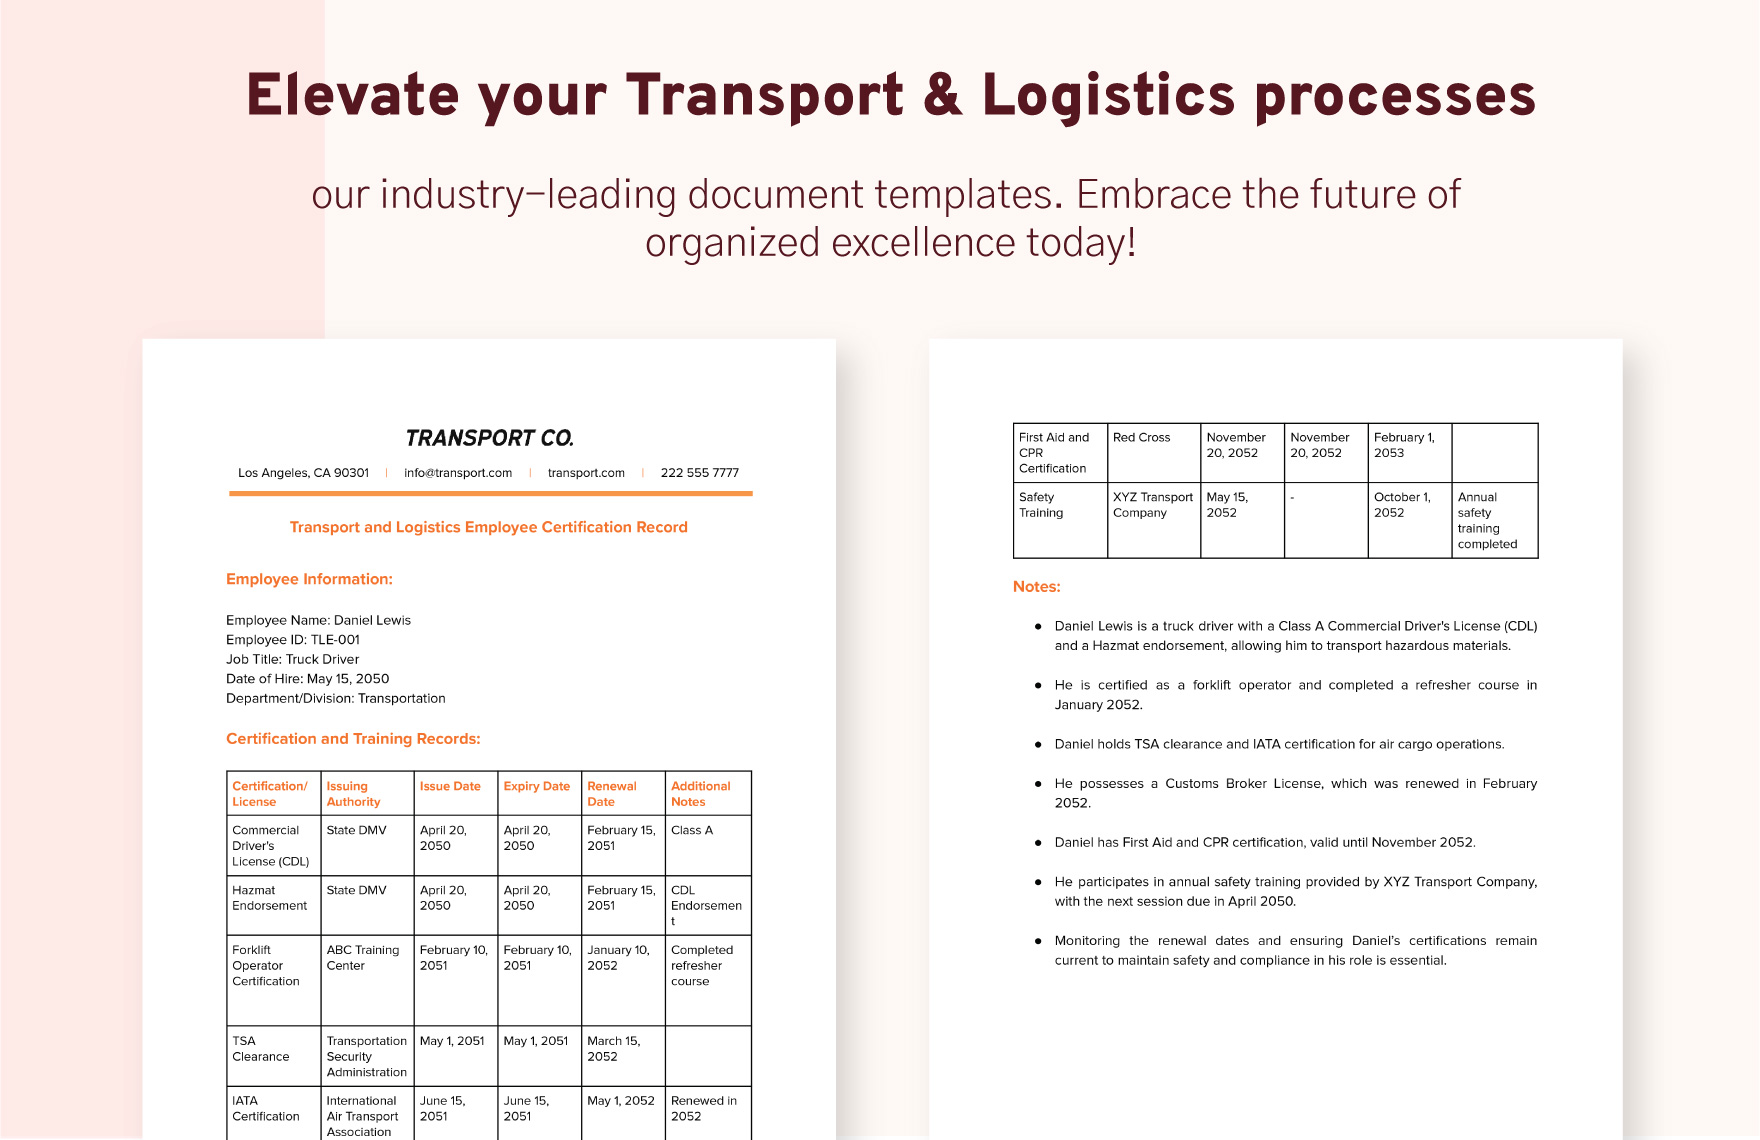 Transport and Logistics Employee Certification Record Template